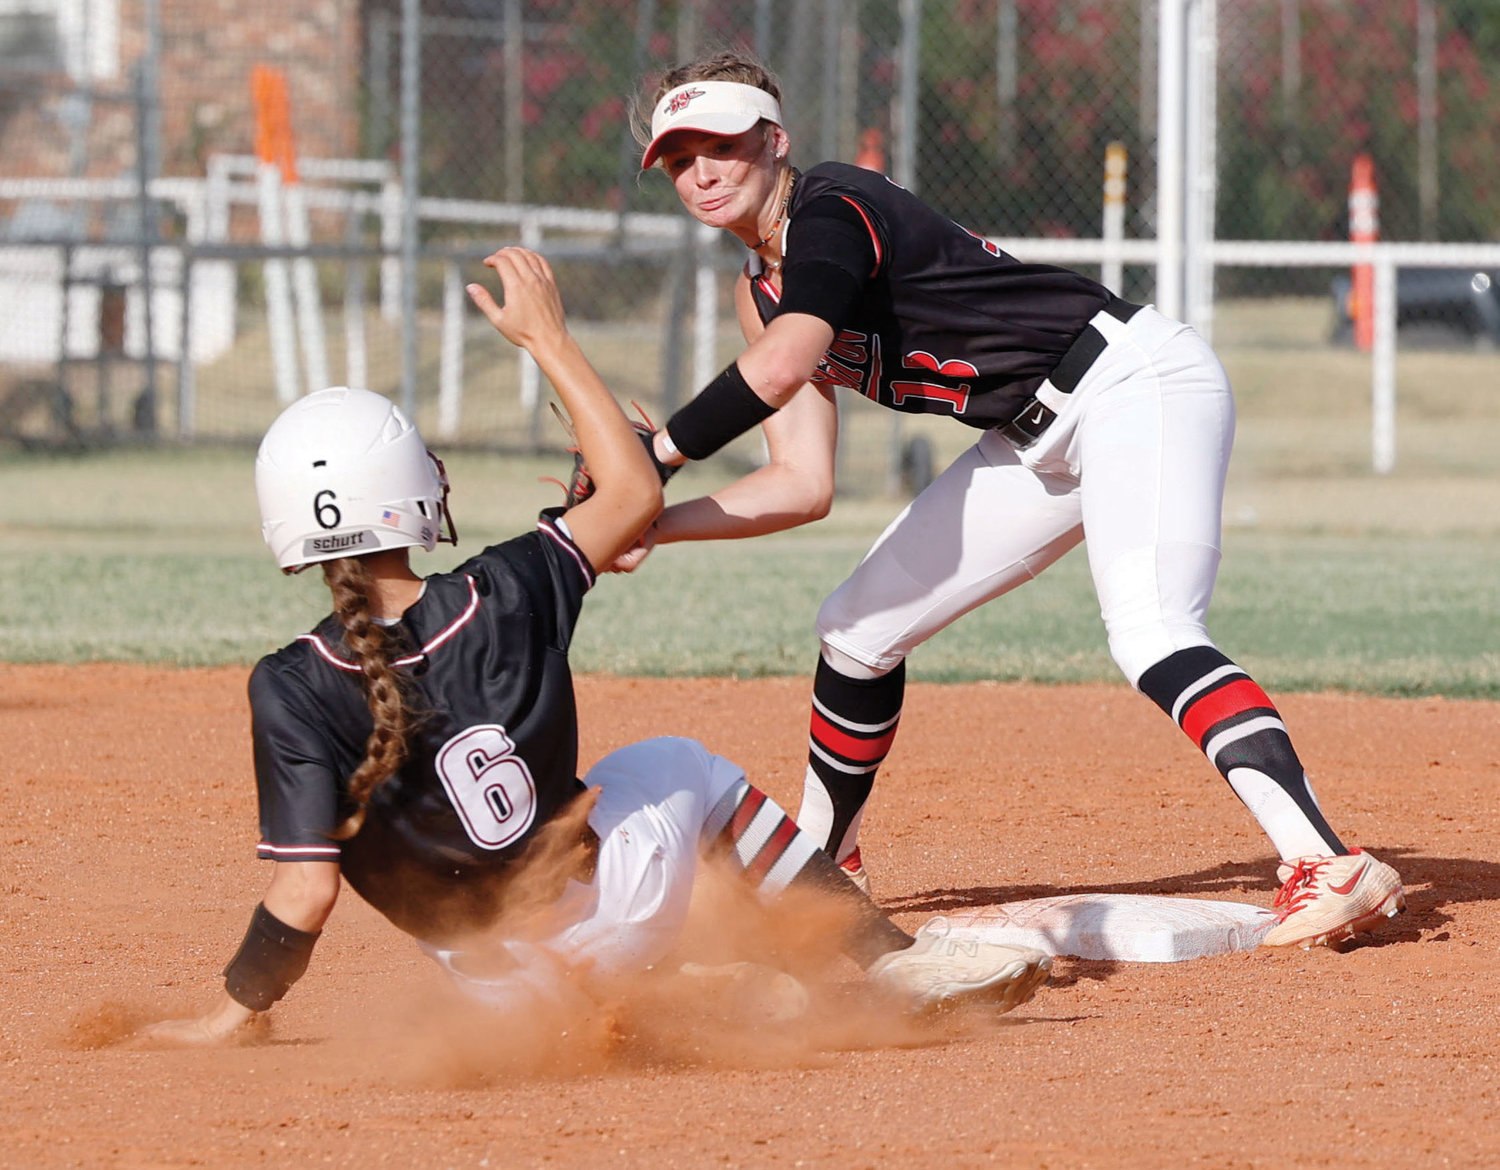 Washington senior Ellie Loveless tags a Tuttle base runner during the Warriors’ 2-1 win over the Tigers on Monday.